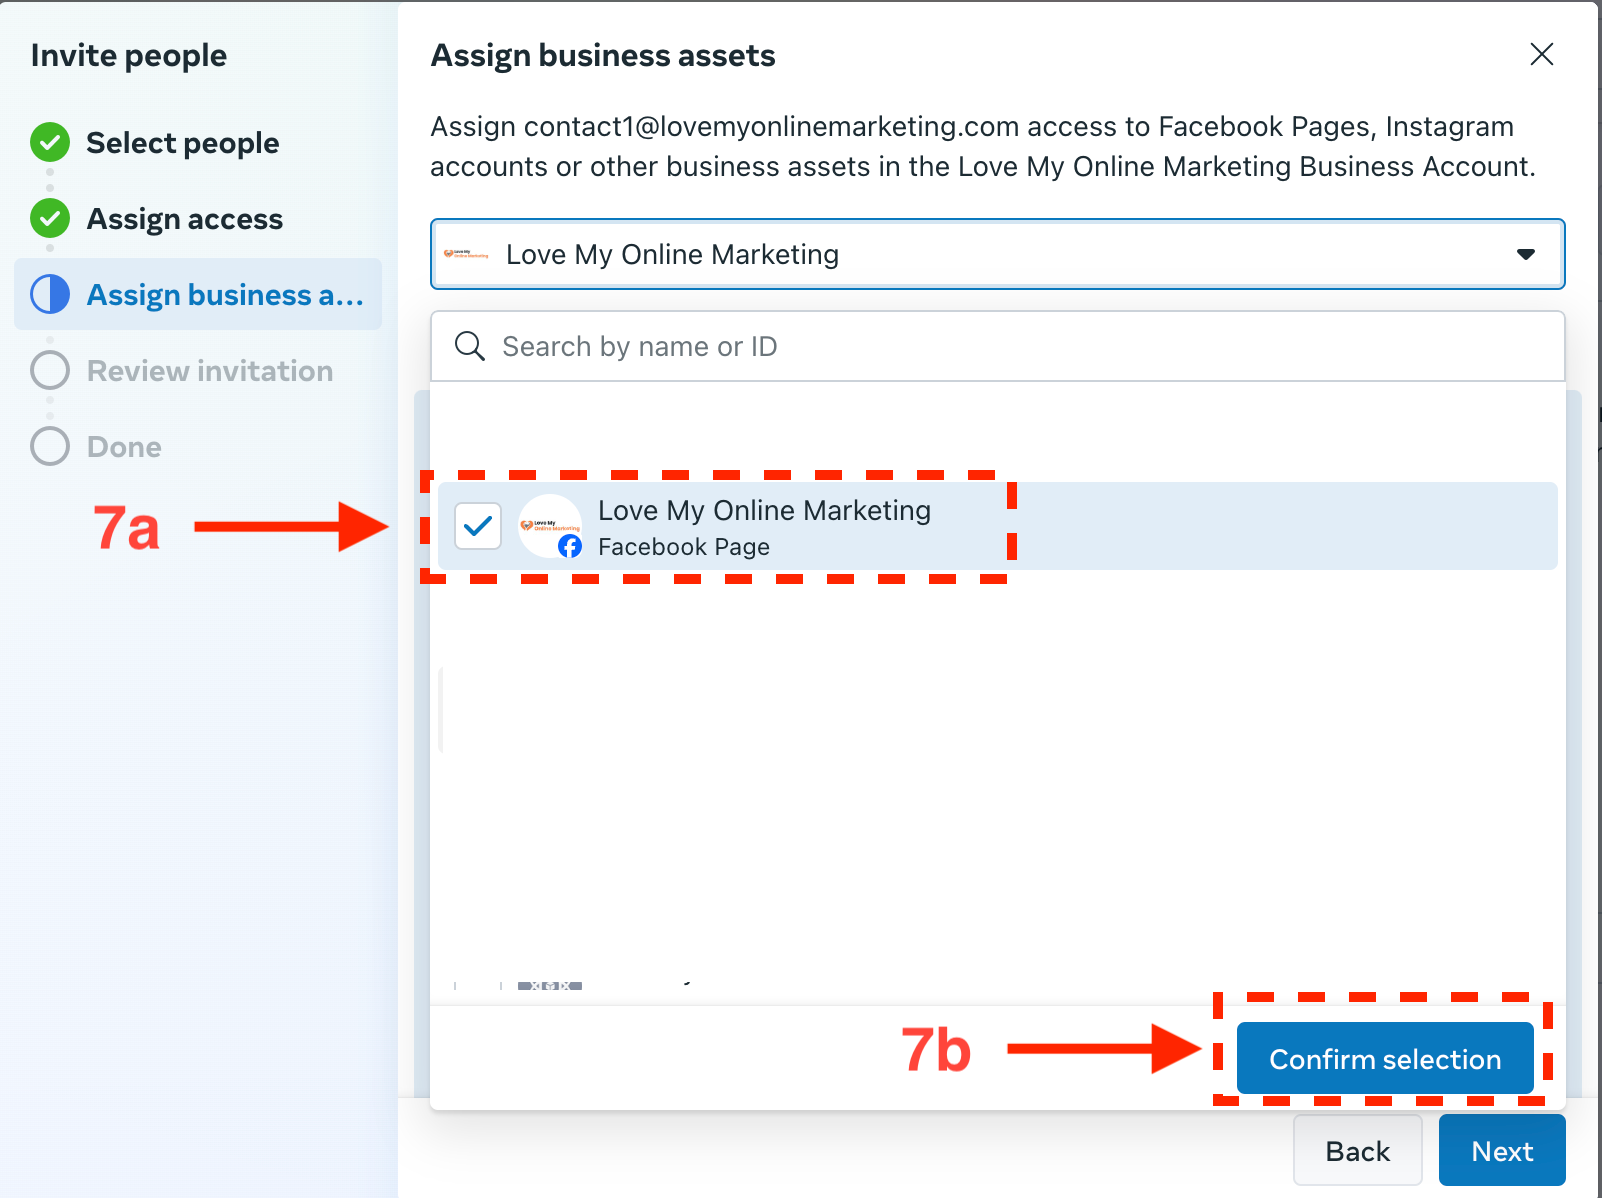 Assign business assets and Confirm selection